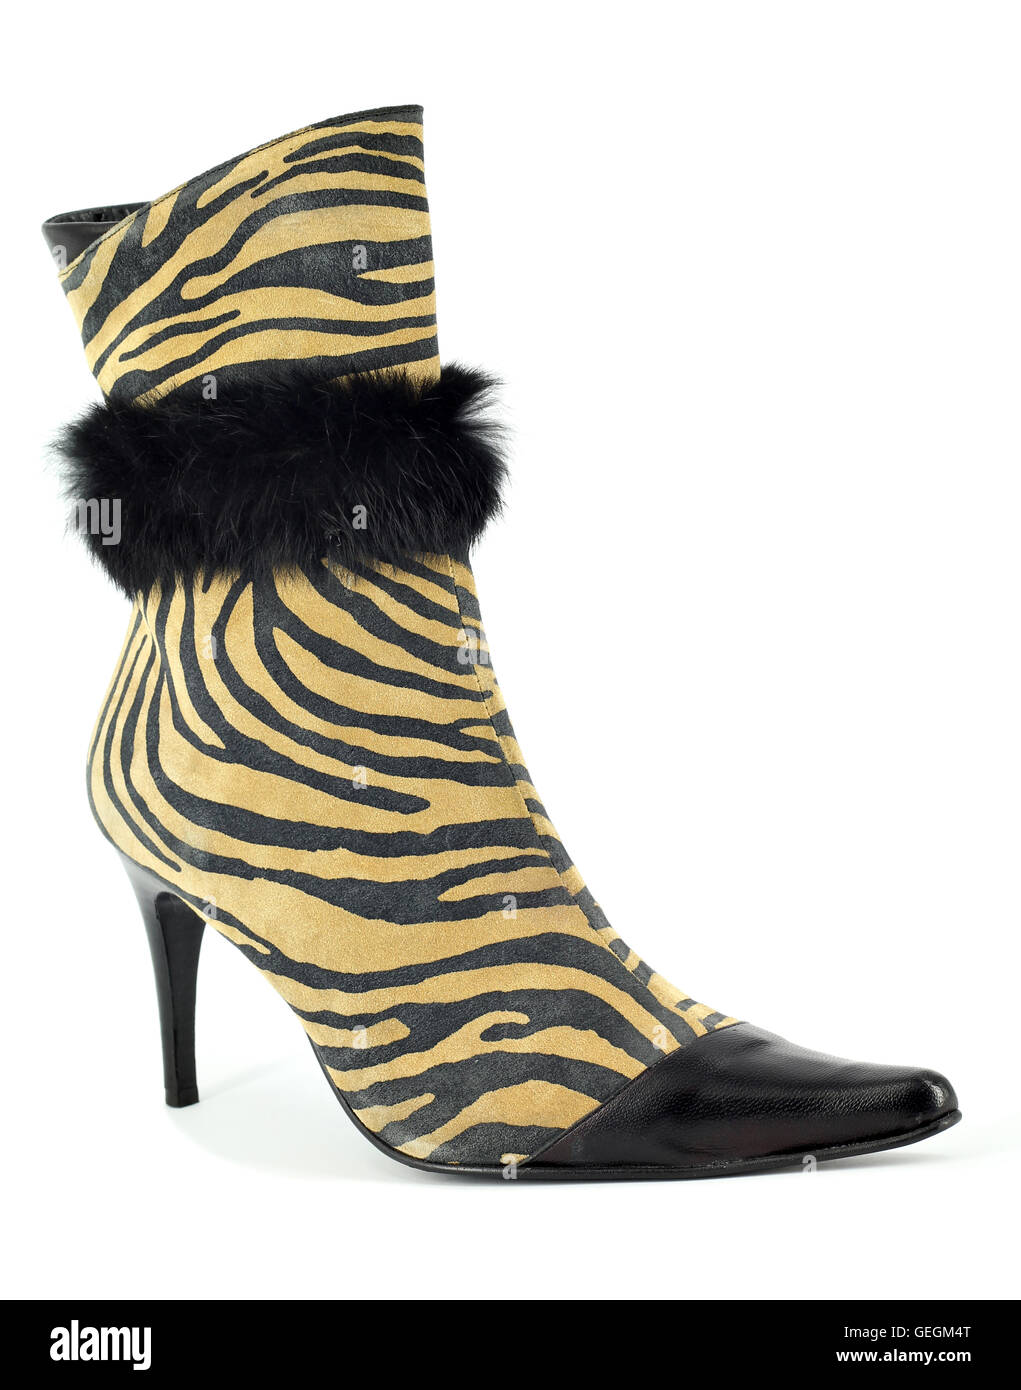 women boot with tiger stripes Stock Photo